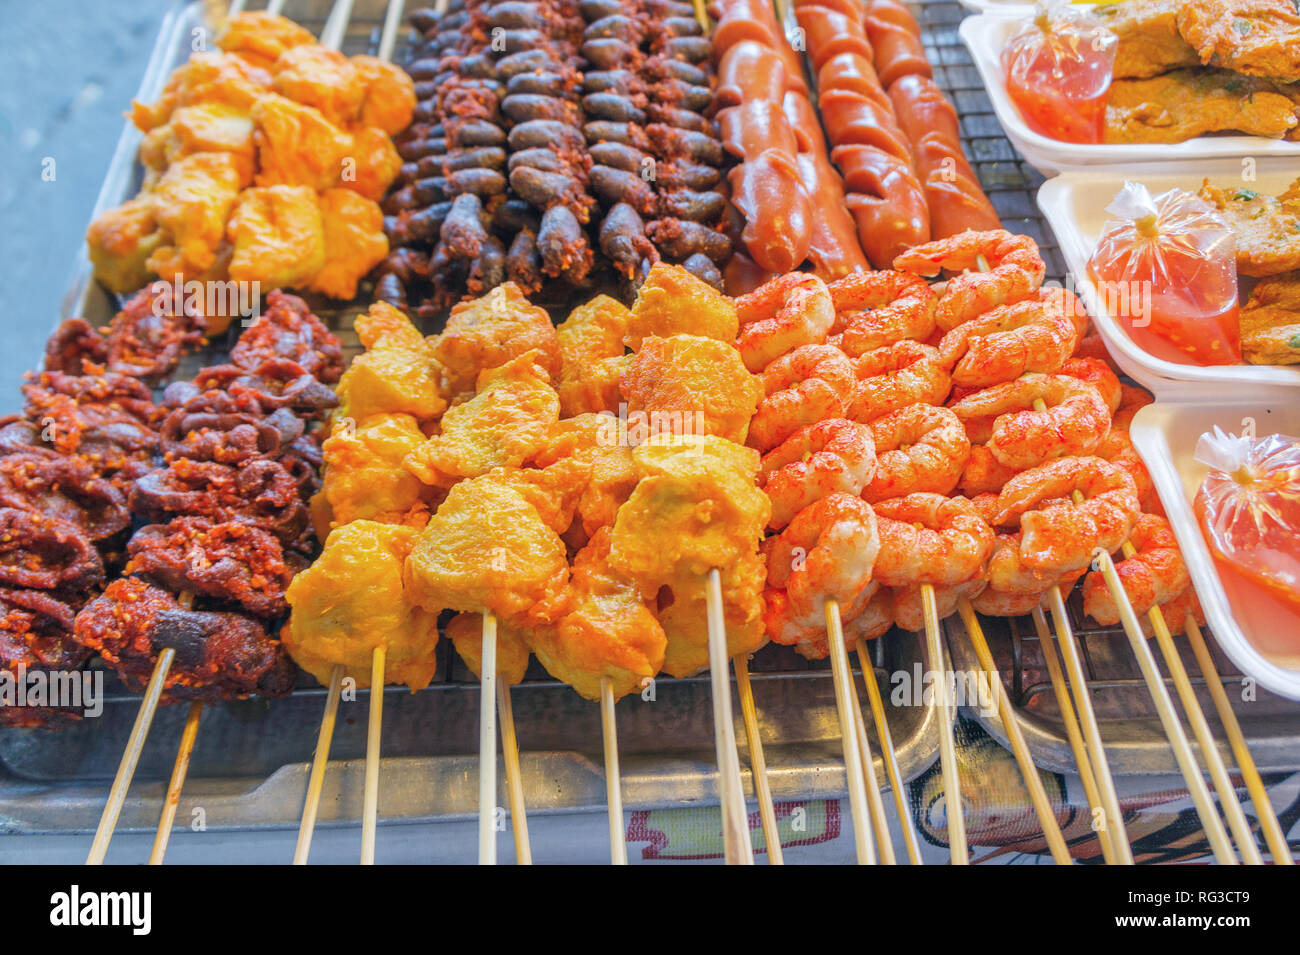 Streetfood in south east asia. Barbecue Grill Street Food in Thailand. Fried food with sticks, Thai style food Stock Photo